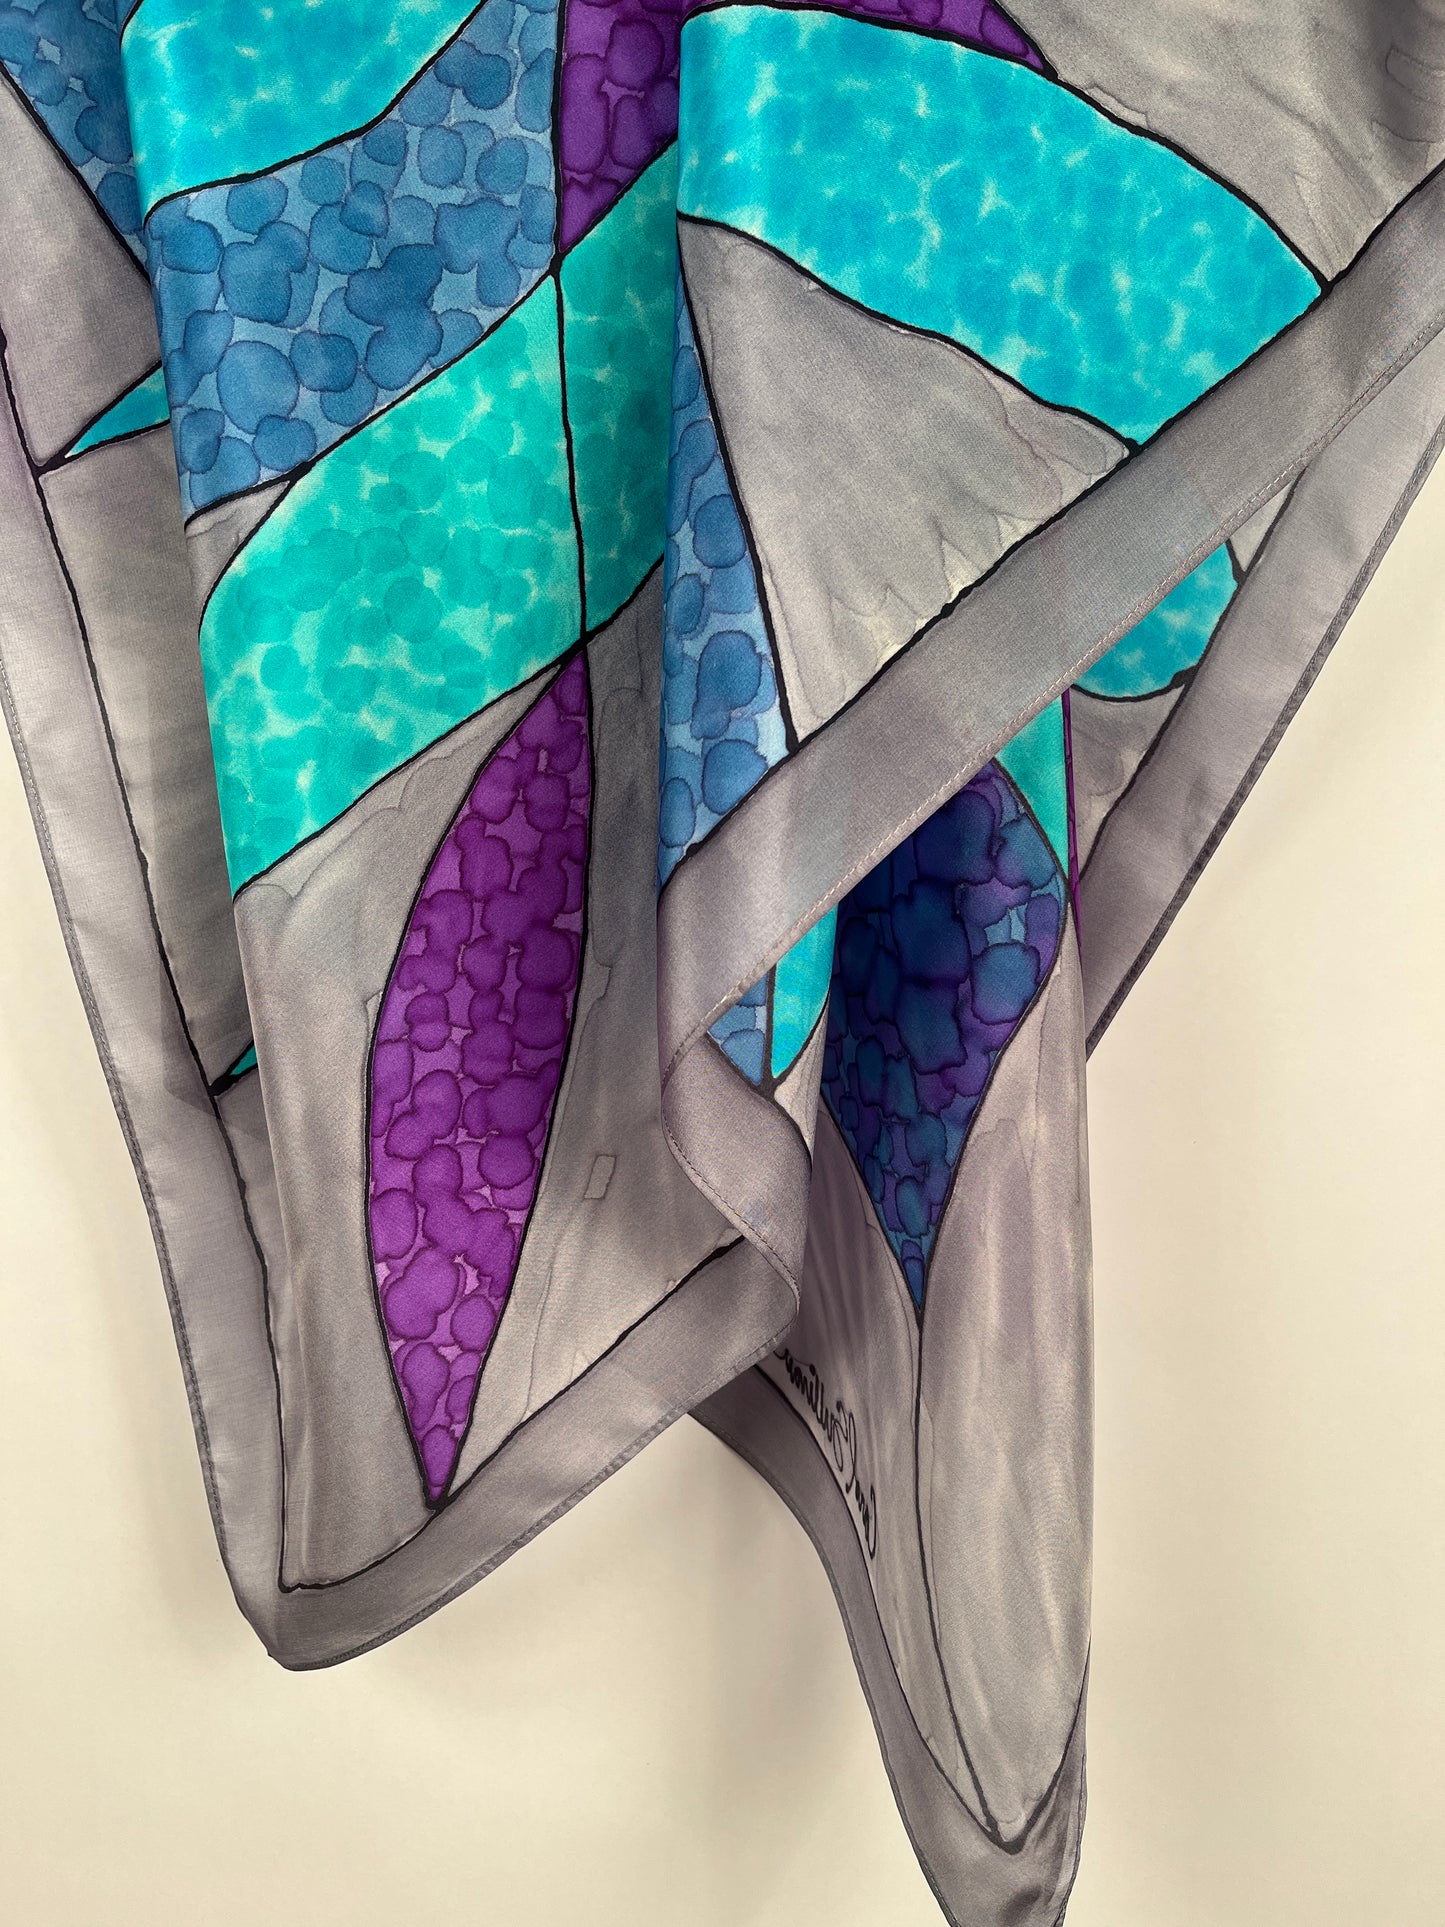 "Stained Glass Pinewheel" - Hand-dyed Silk Scarf - $140